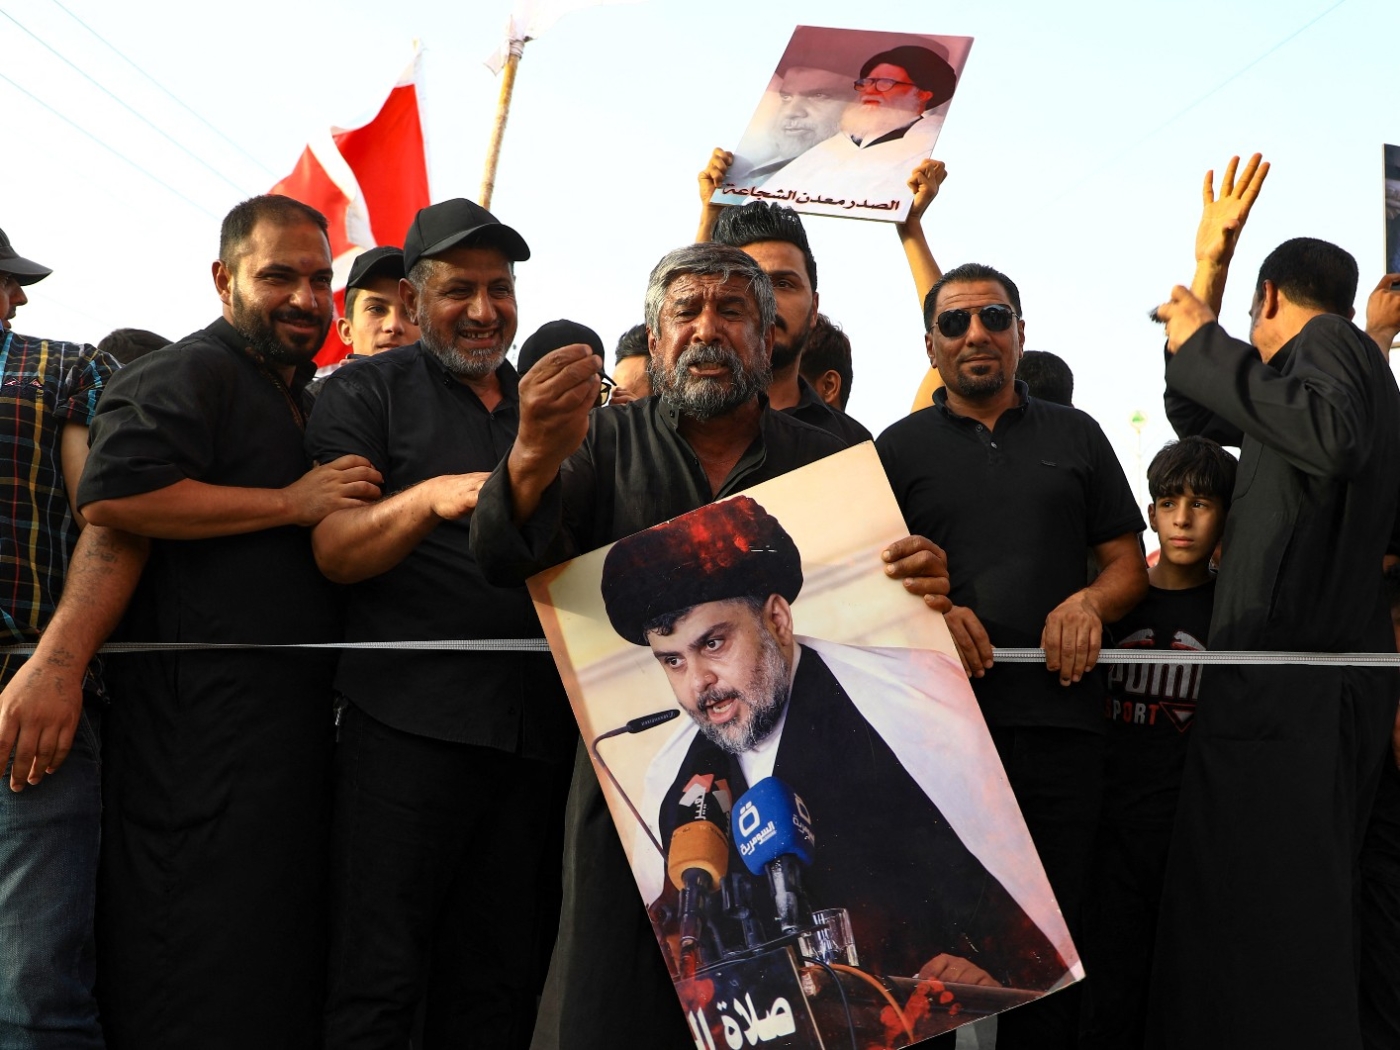 Supporters of Muqtada Sadr in the city of Nasiriyah on 14 August (AFP)